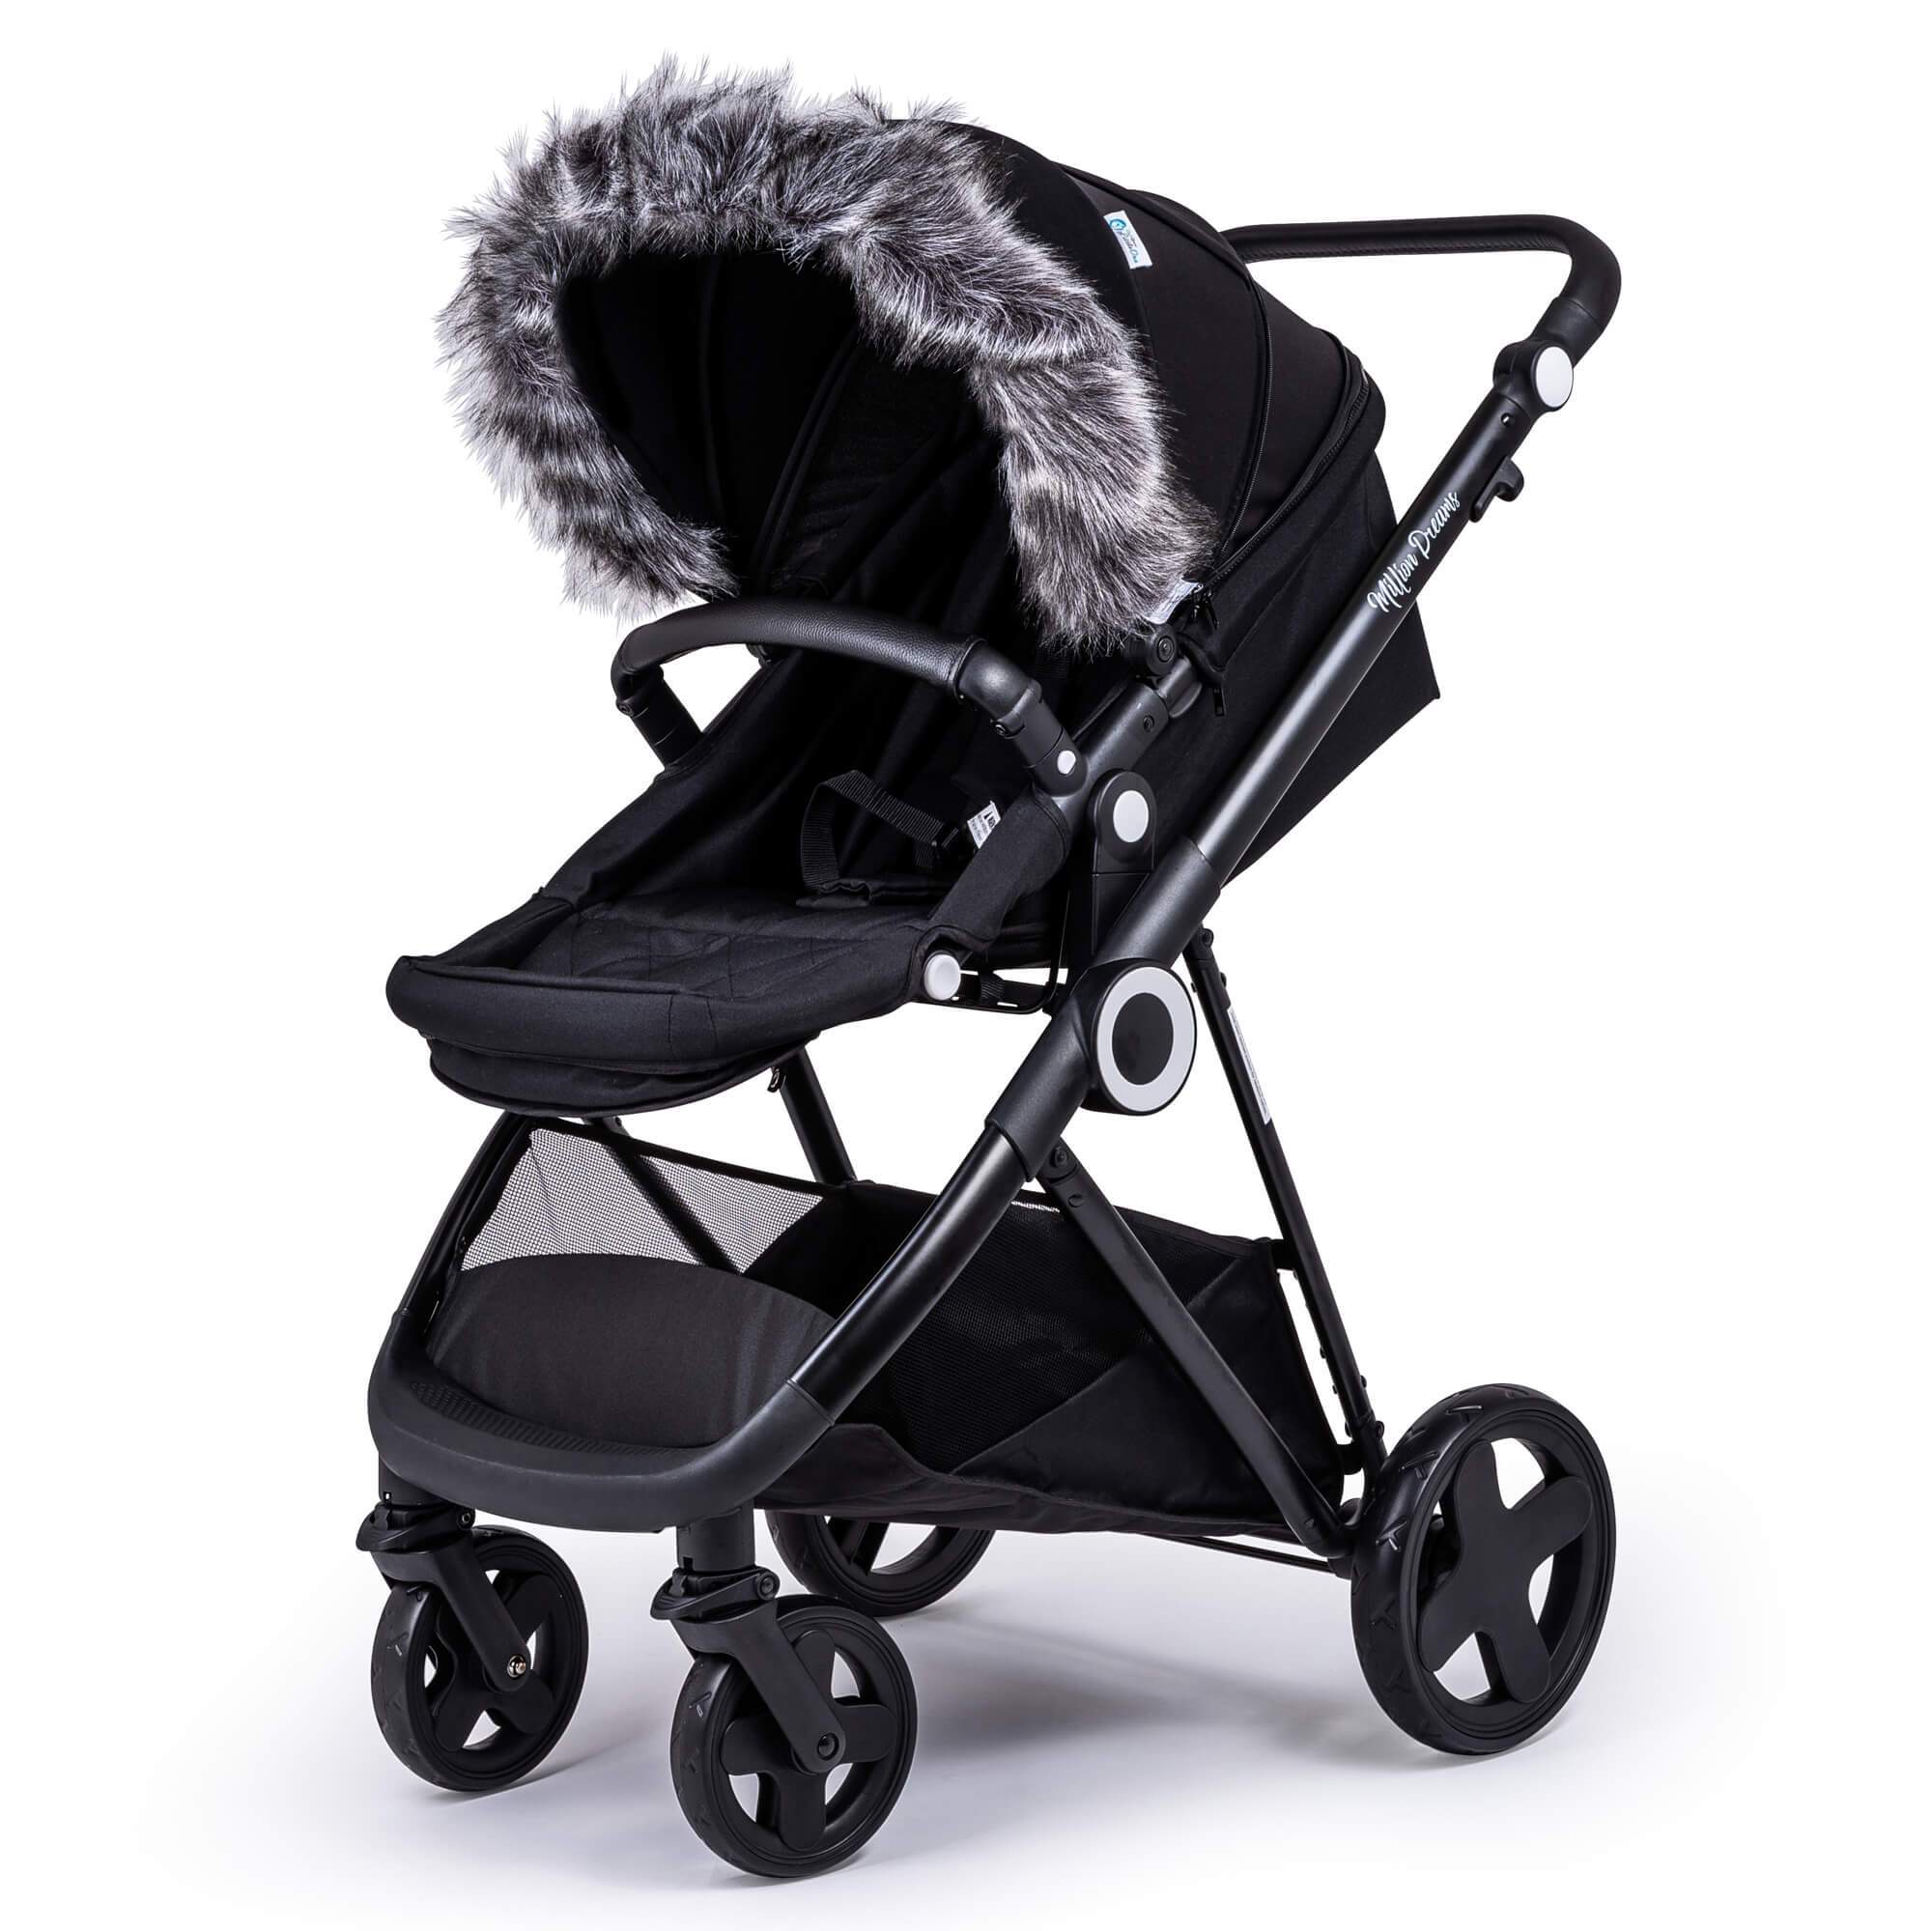 Pram Fur Hood Trim Attachment for Pushchair Compatible with Zeta - Dark Grey / Fits All Models | For Your Little One